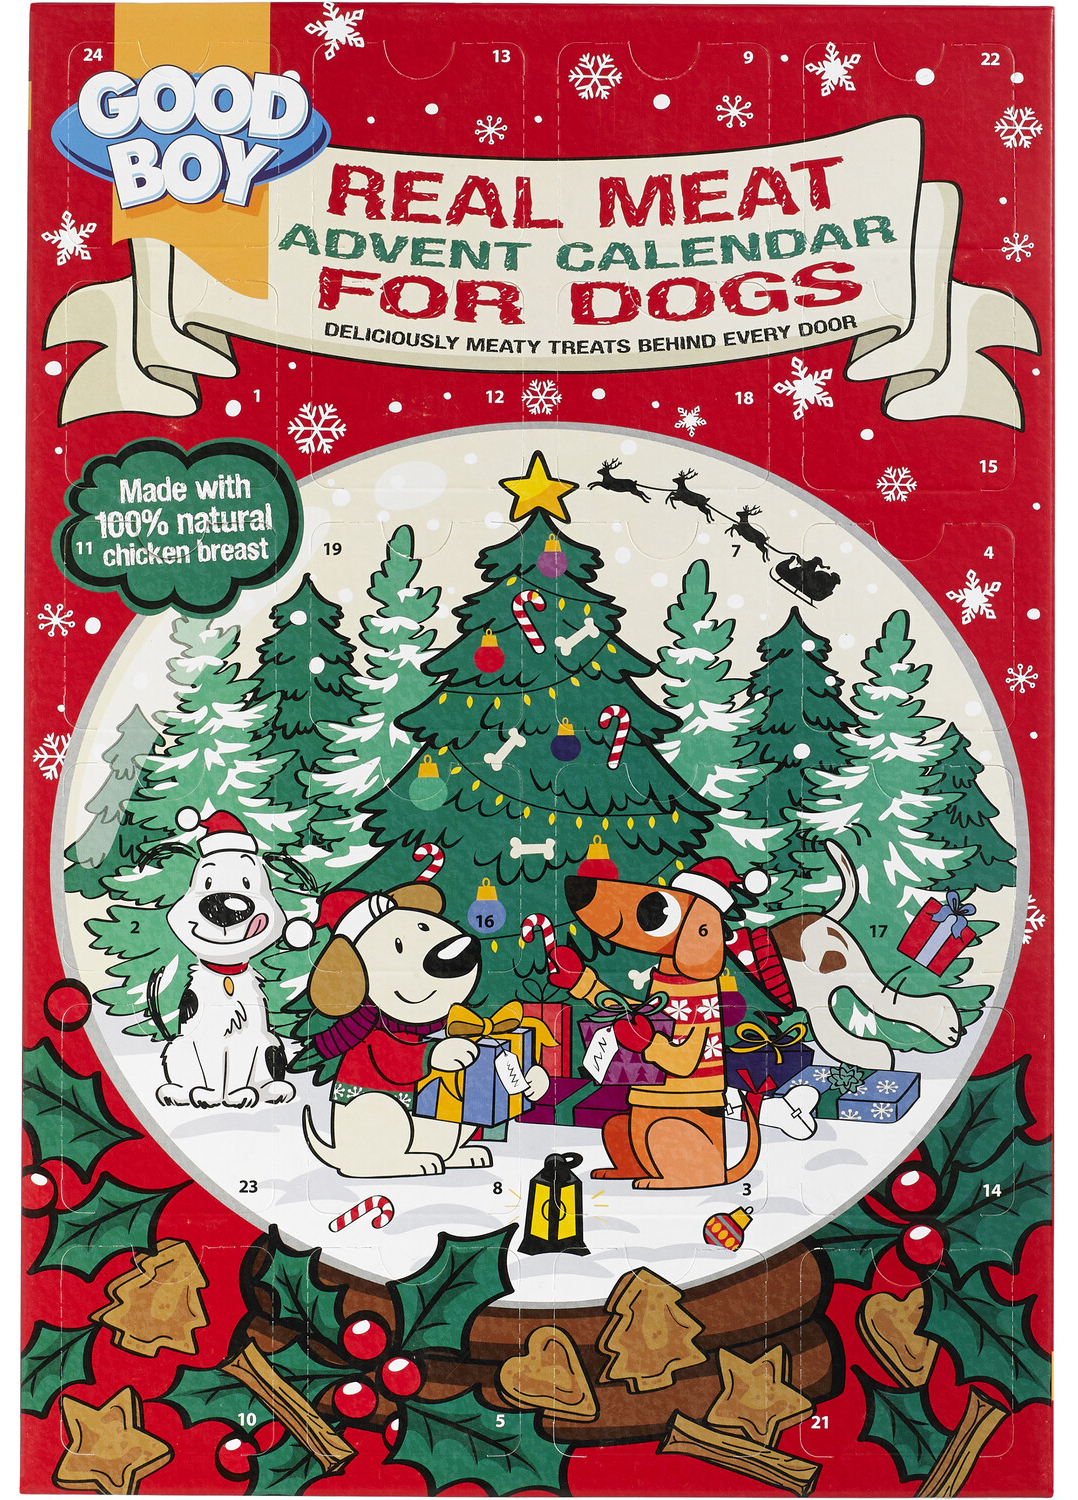 Good Boy Real Meat Advent Calendar for Dogs - Red Content (EN)